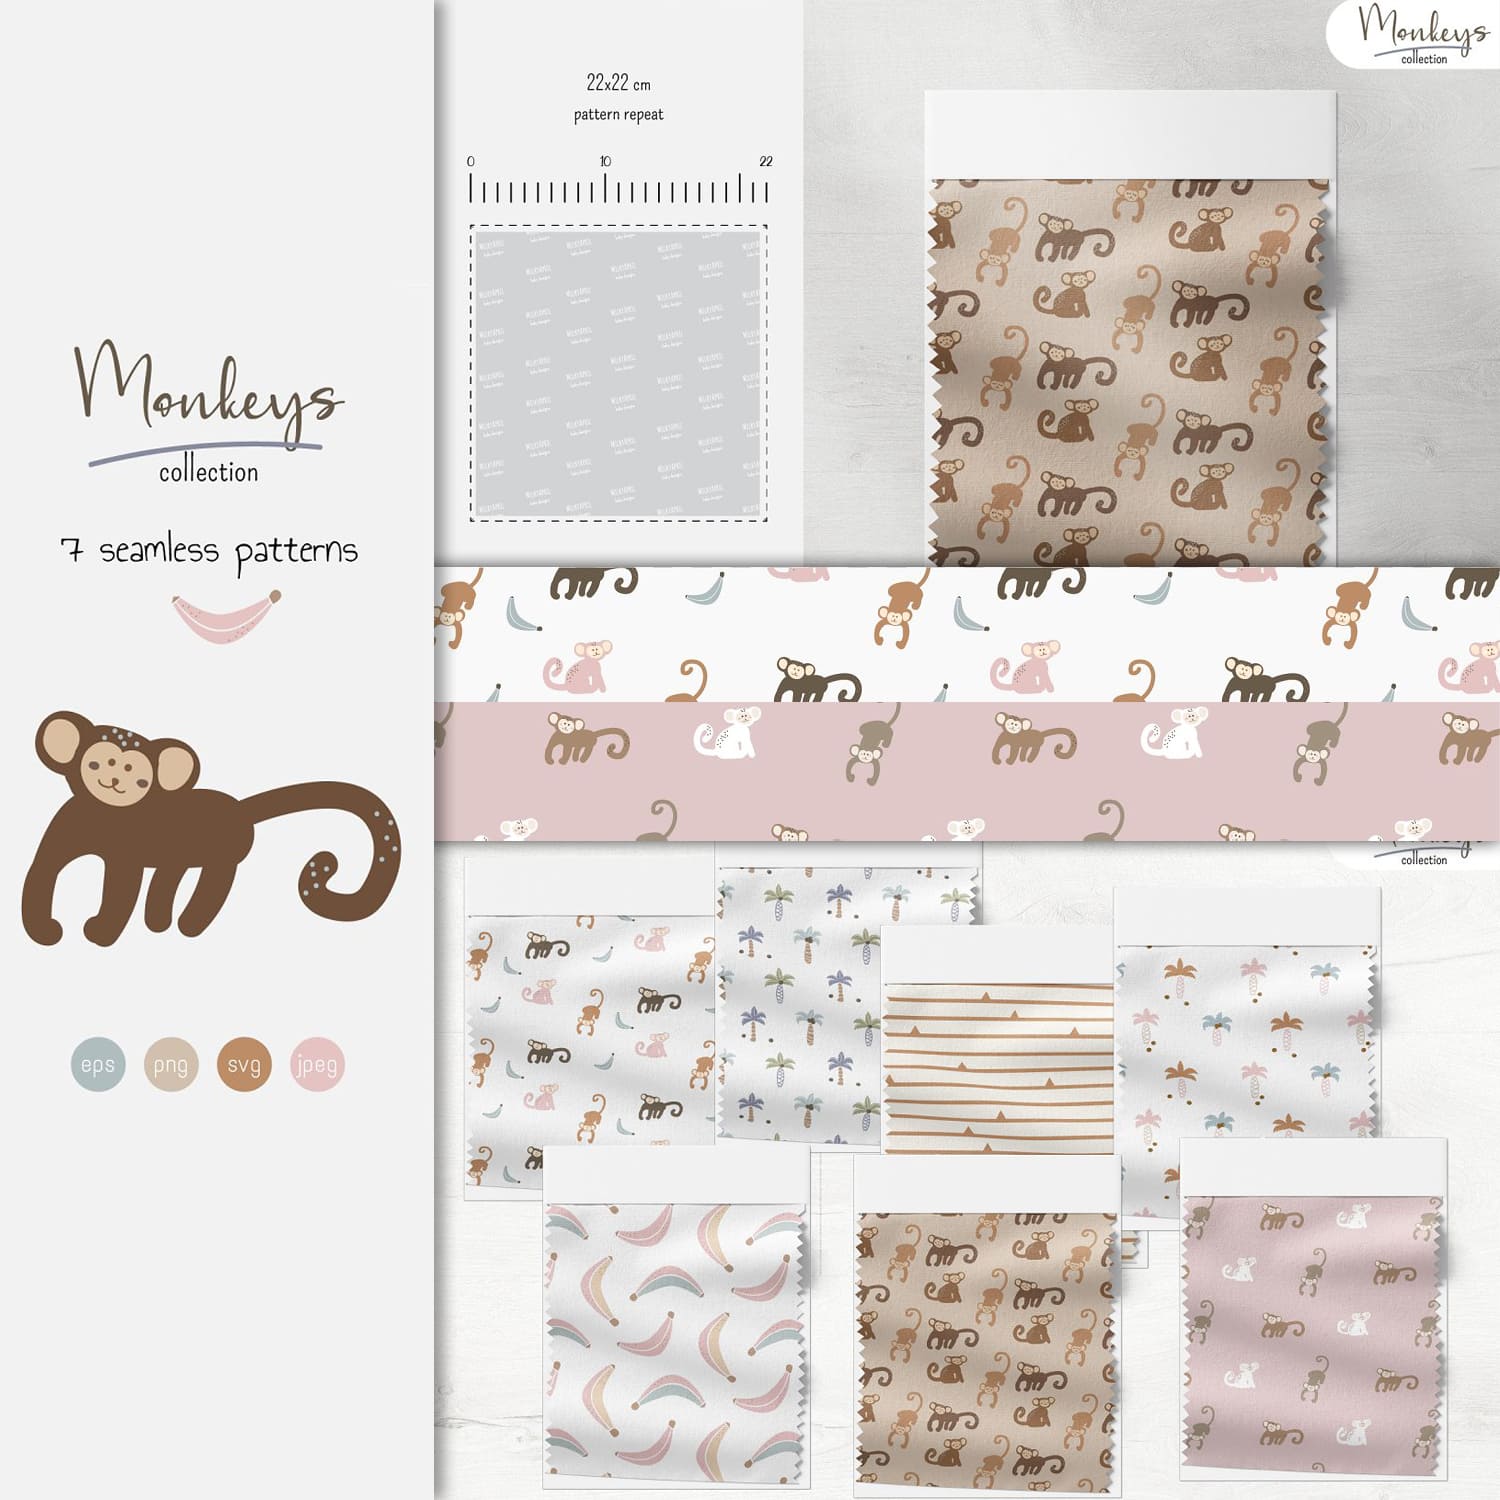 Monkeys - Baby Seamless Patterns cover.